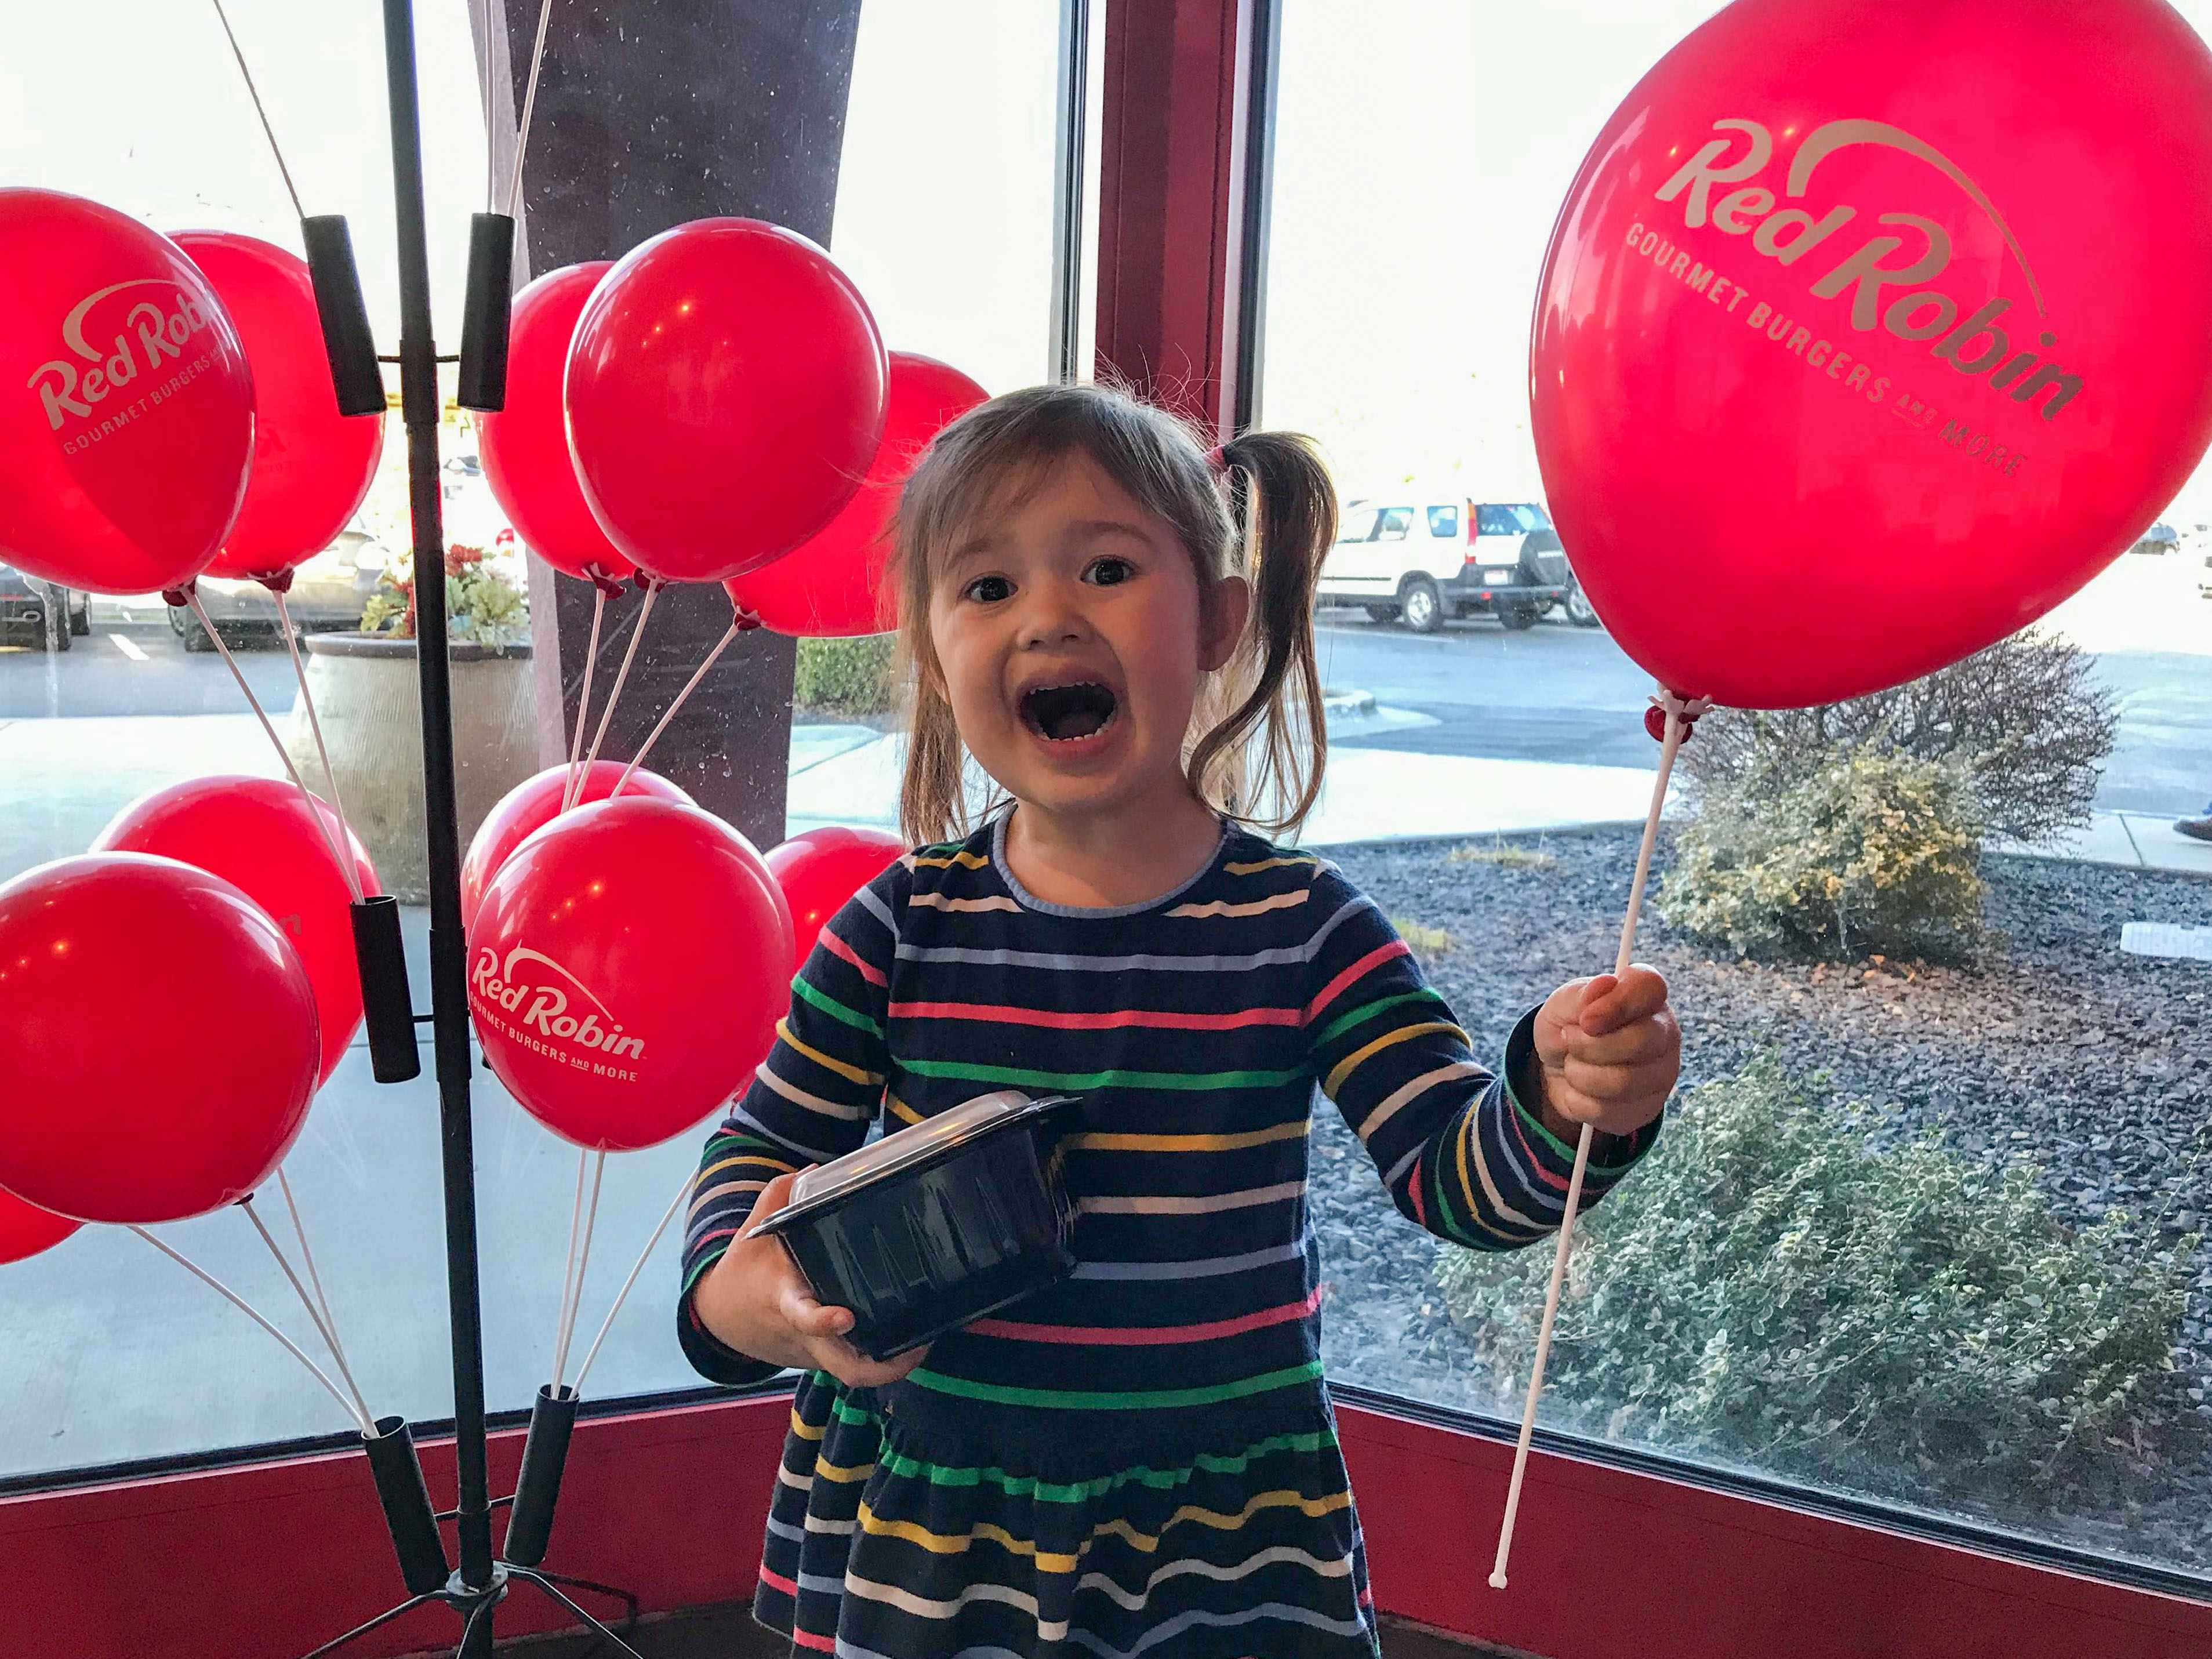 A child inside Red Robin, holding a Red Robin balloon and a takeout container while smiling at the camera.